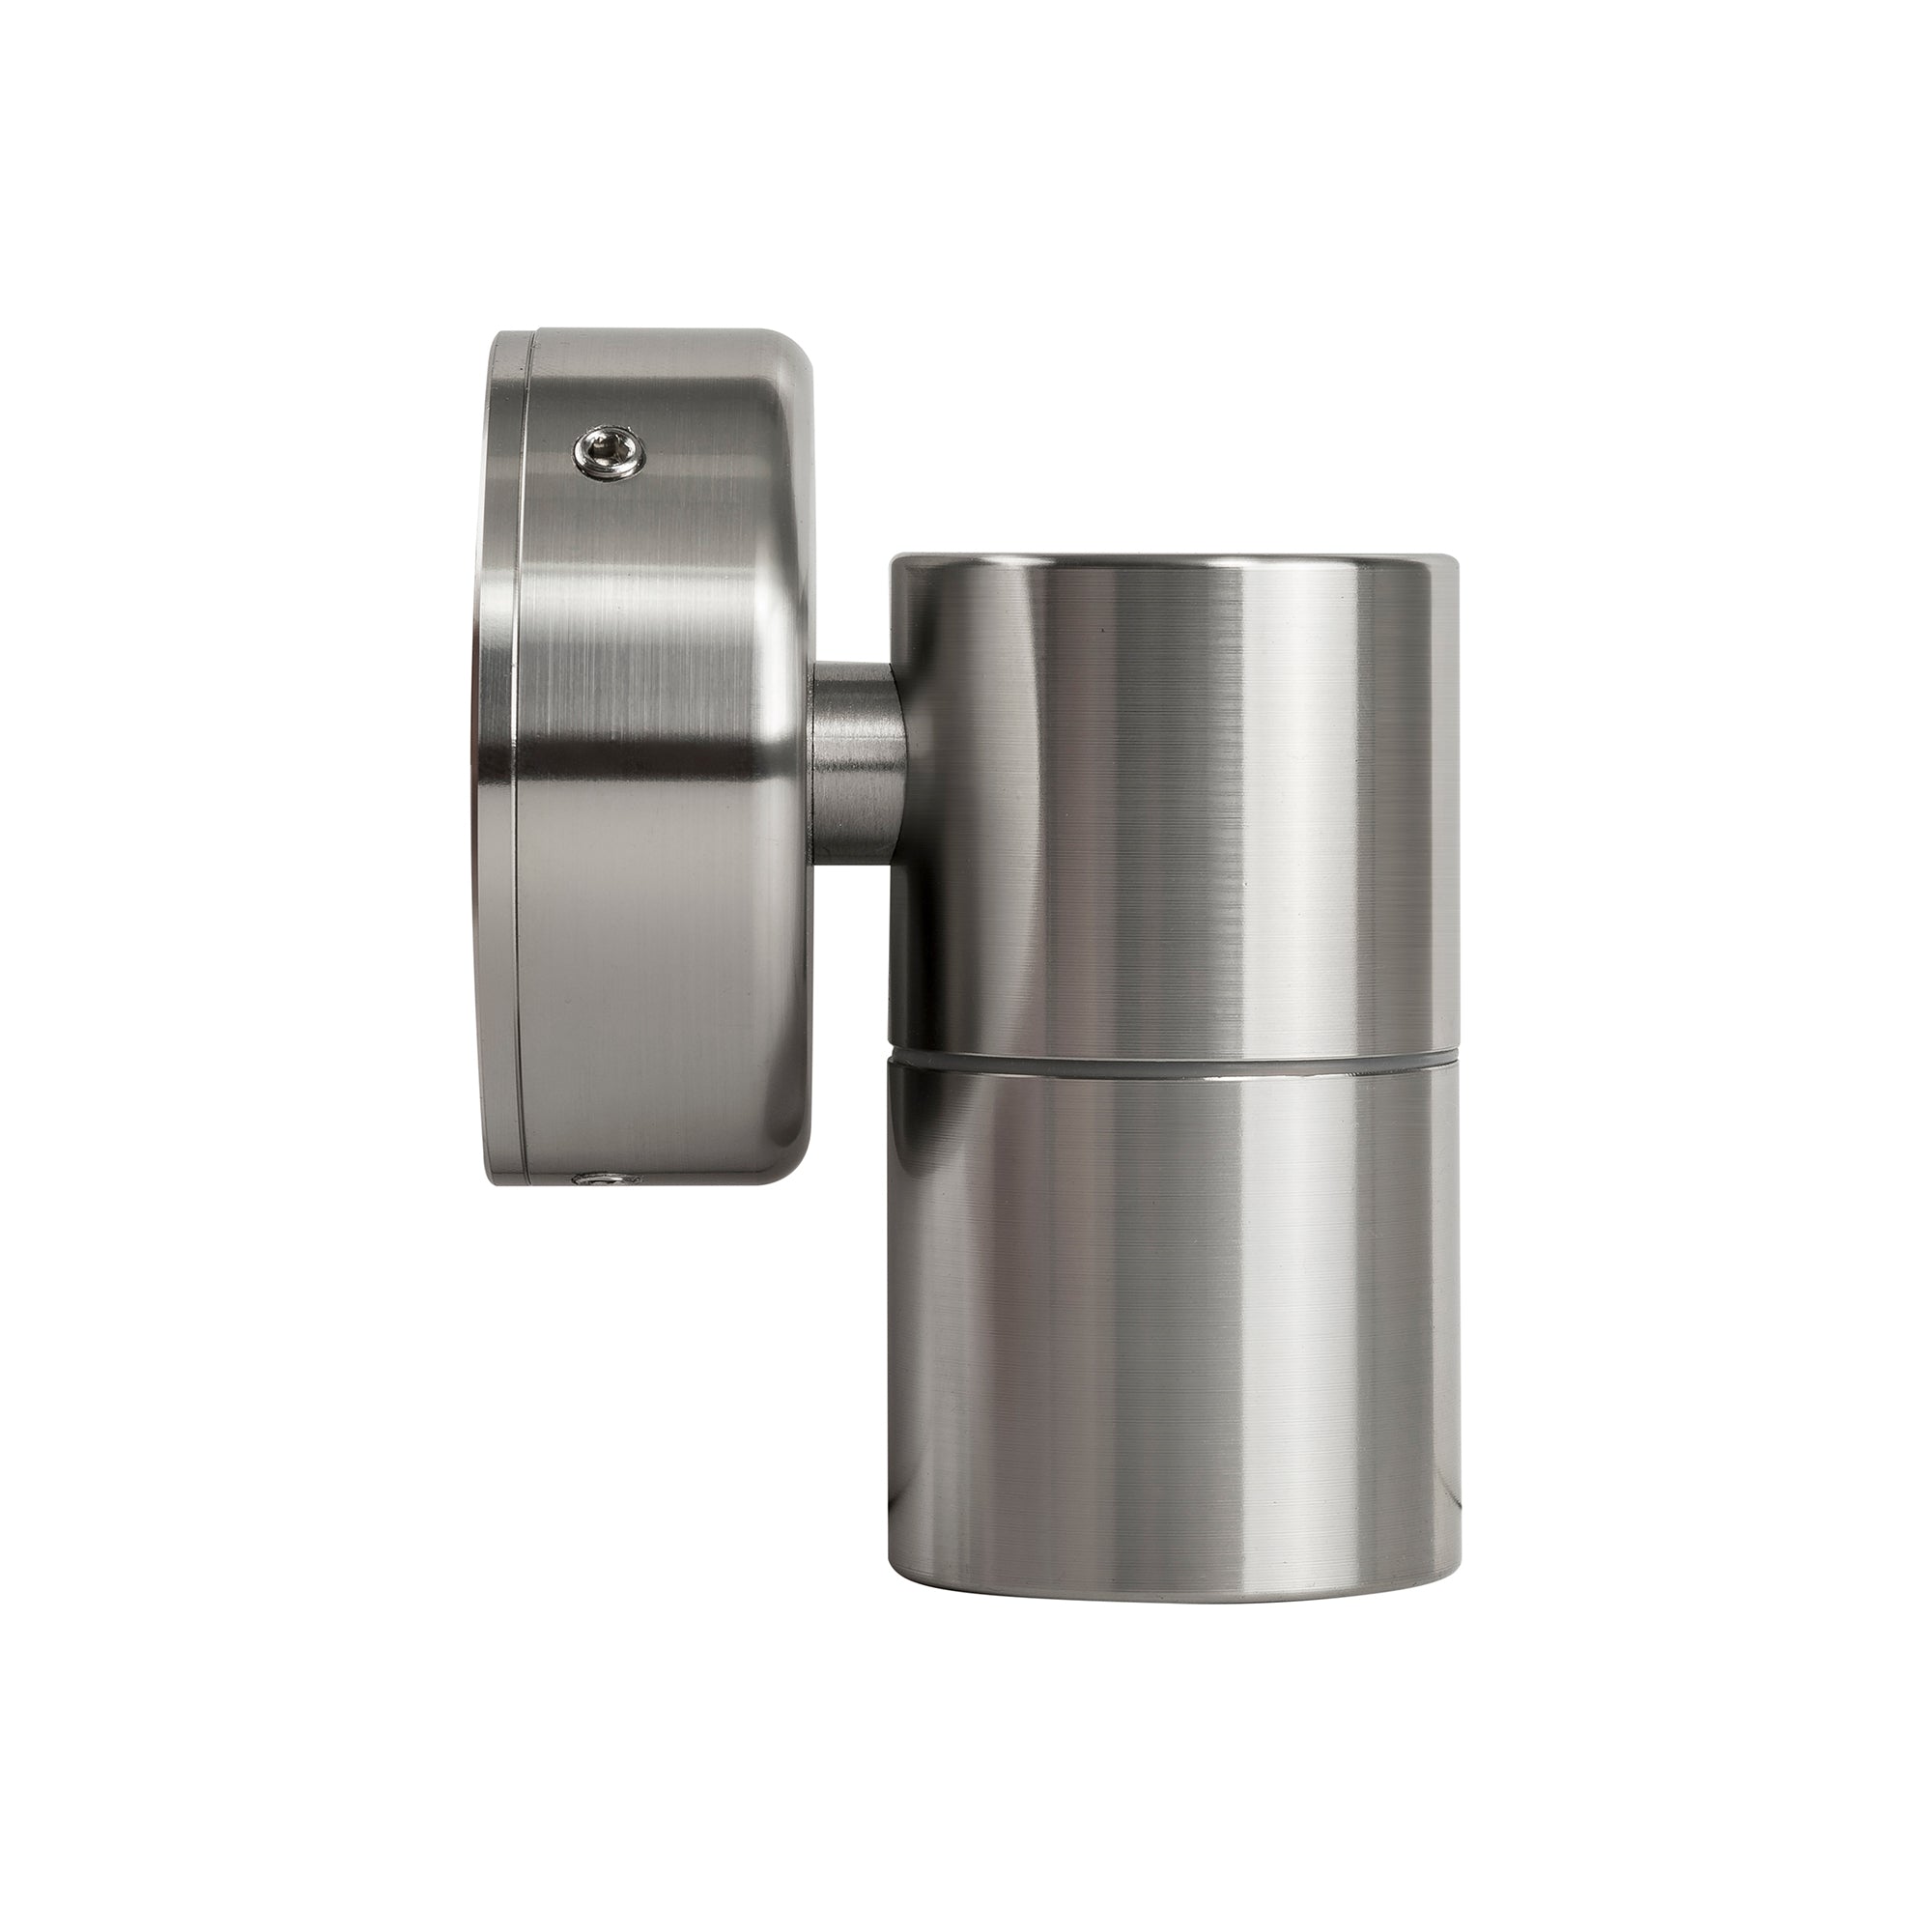 HV1107MR11NW - Mini Tivah 316 Stainless Steel Fixed Down Wall Pillar Lights